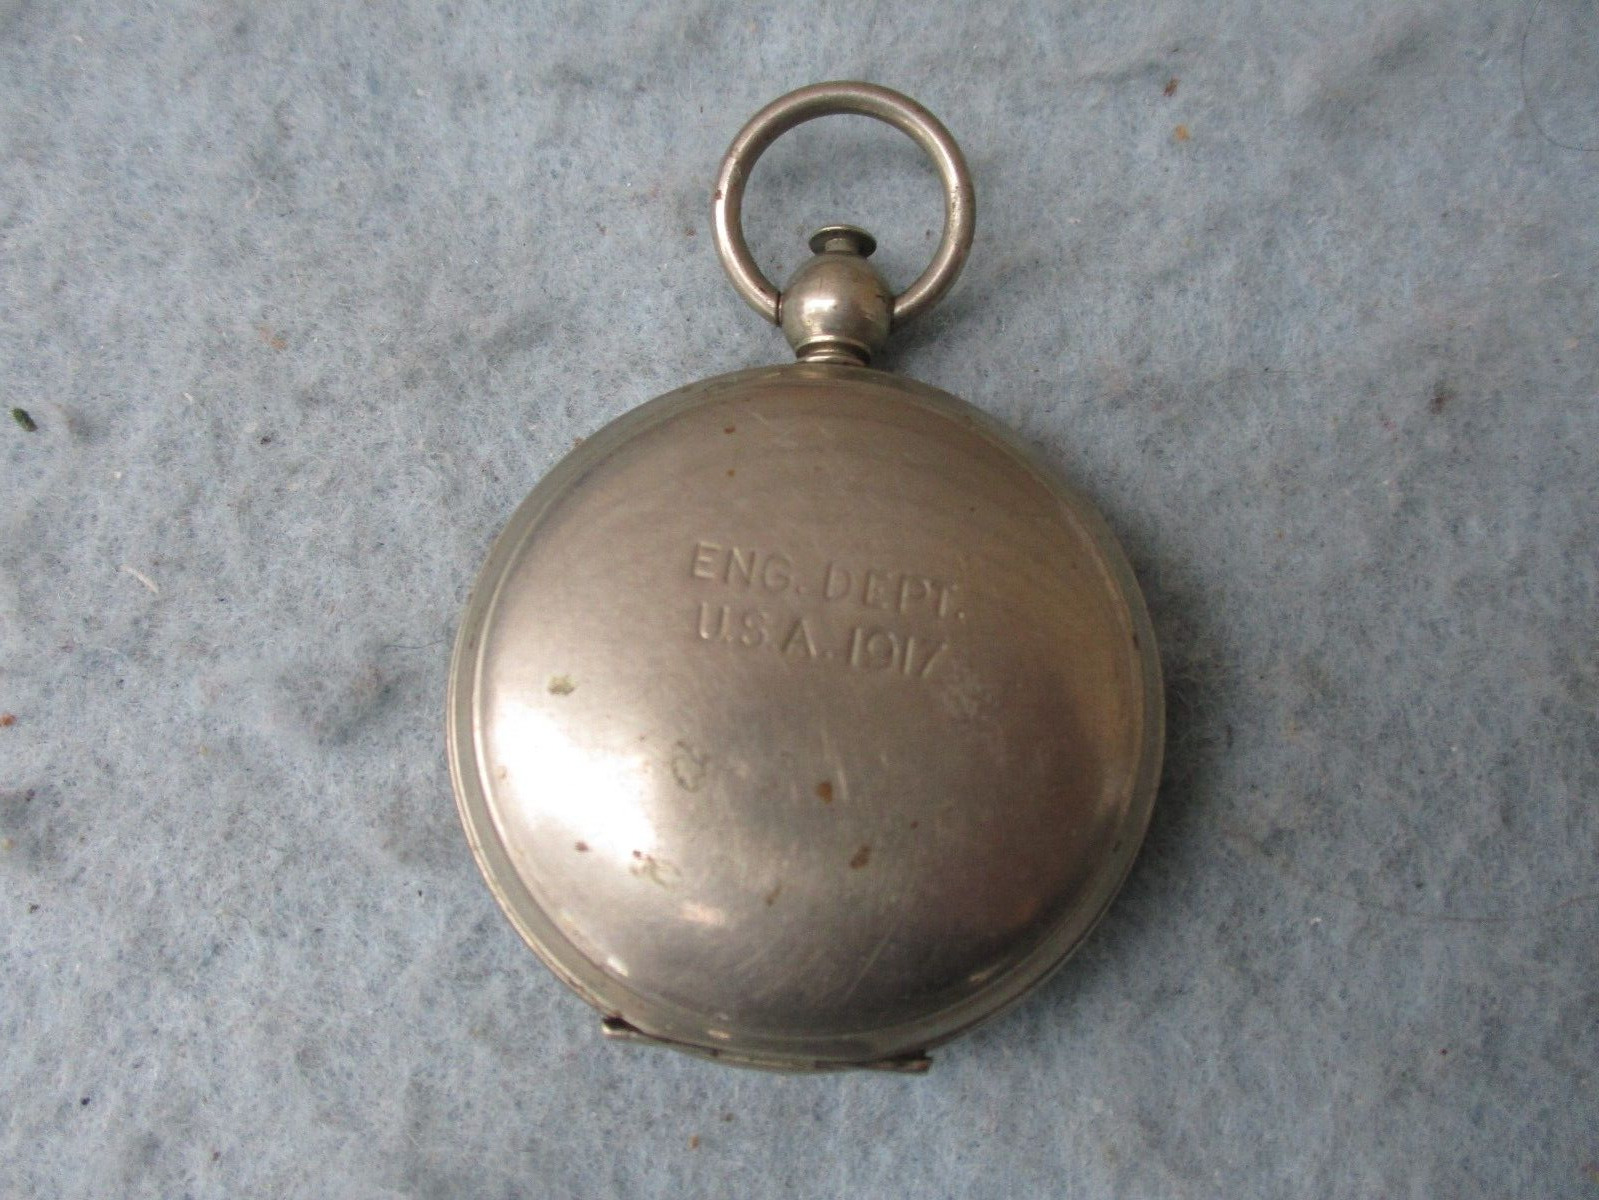 WW1 US Army Officer Compass Pocket Watch Style  USANITE Marked WWI